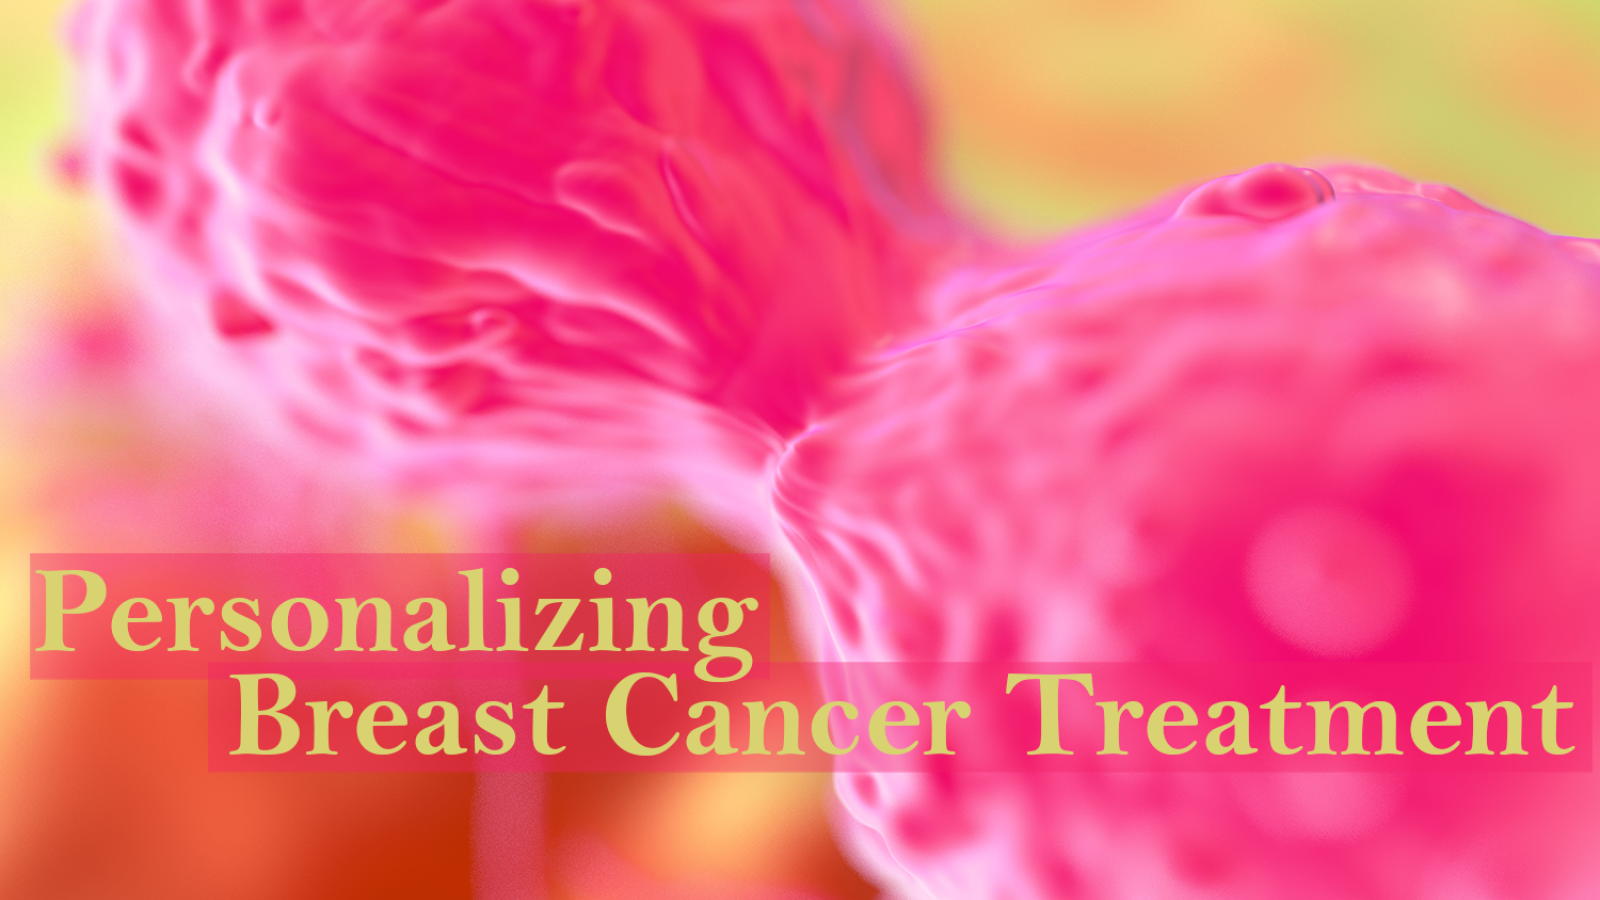 Personalizing Breast Cancer Treatment